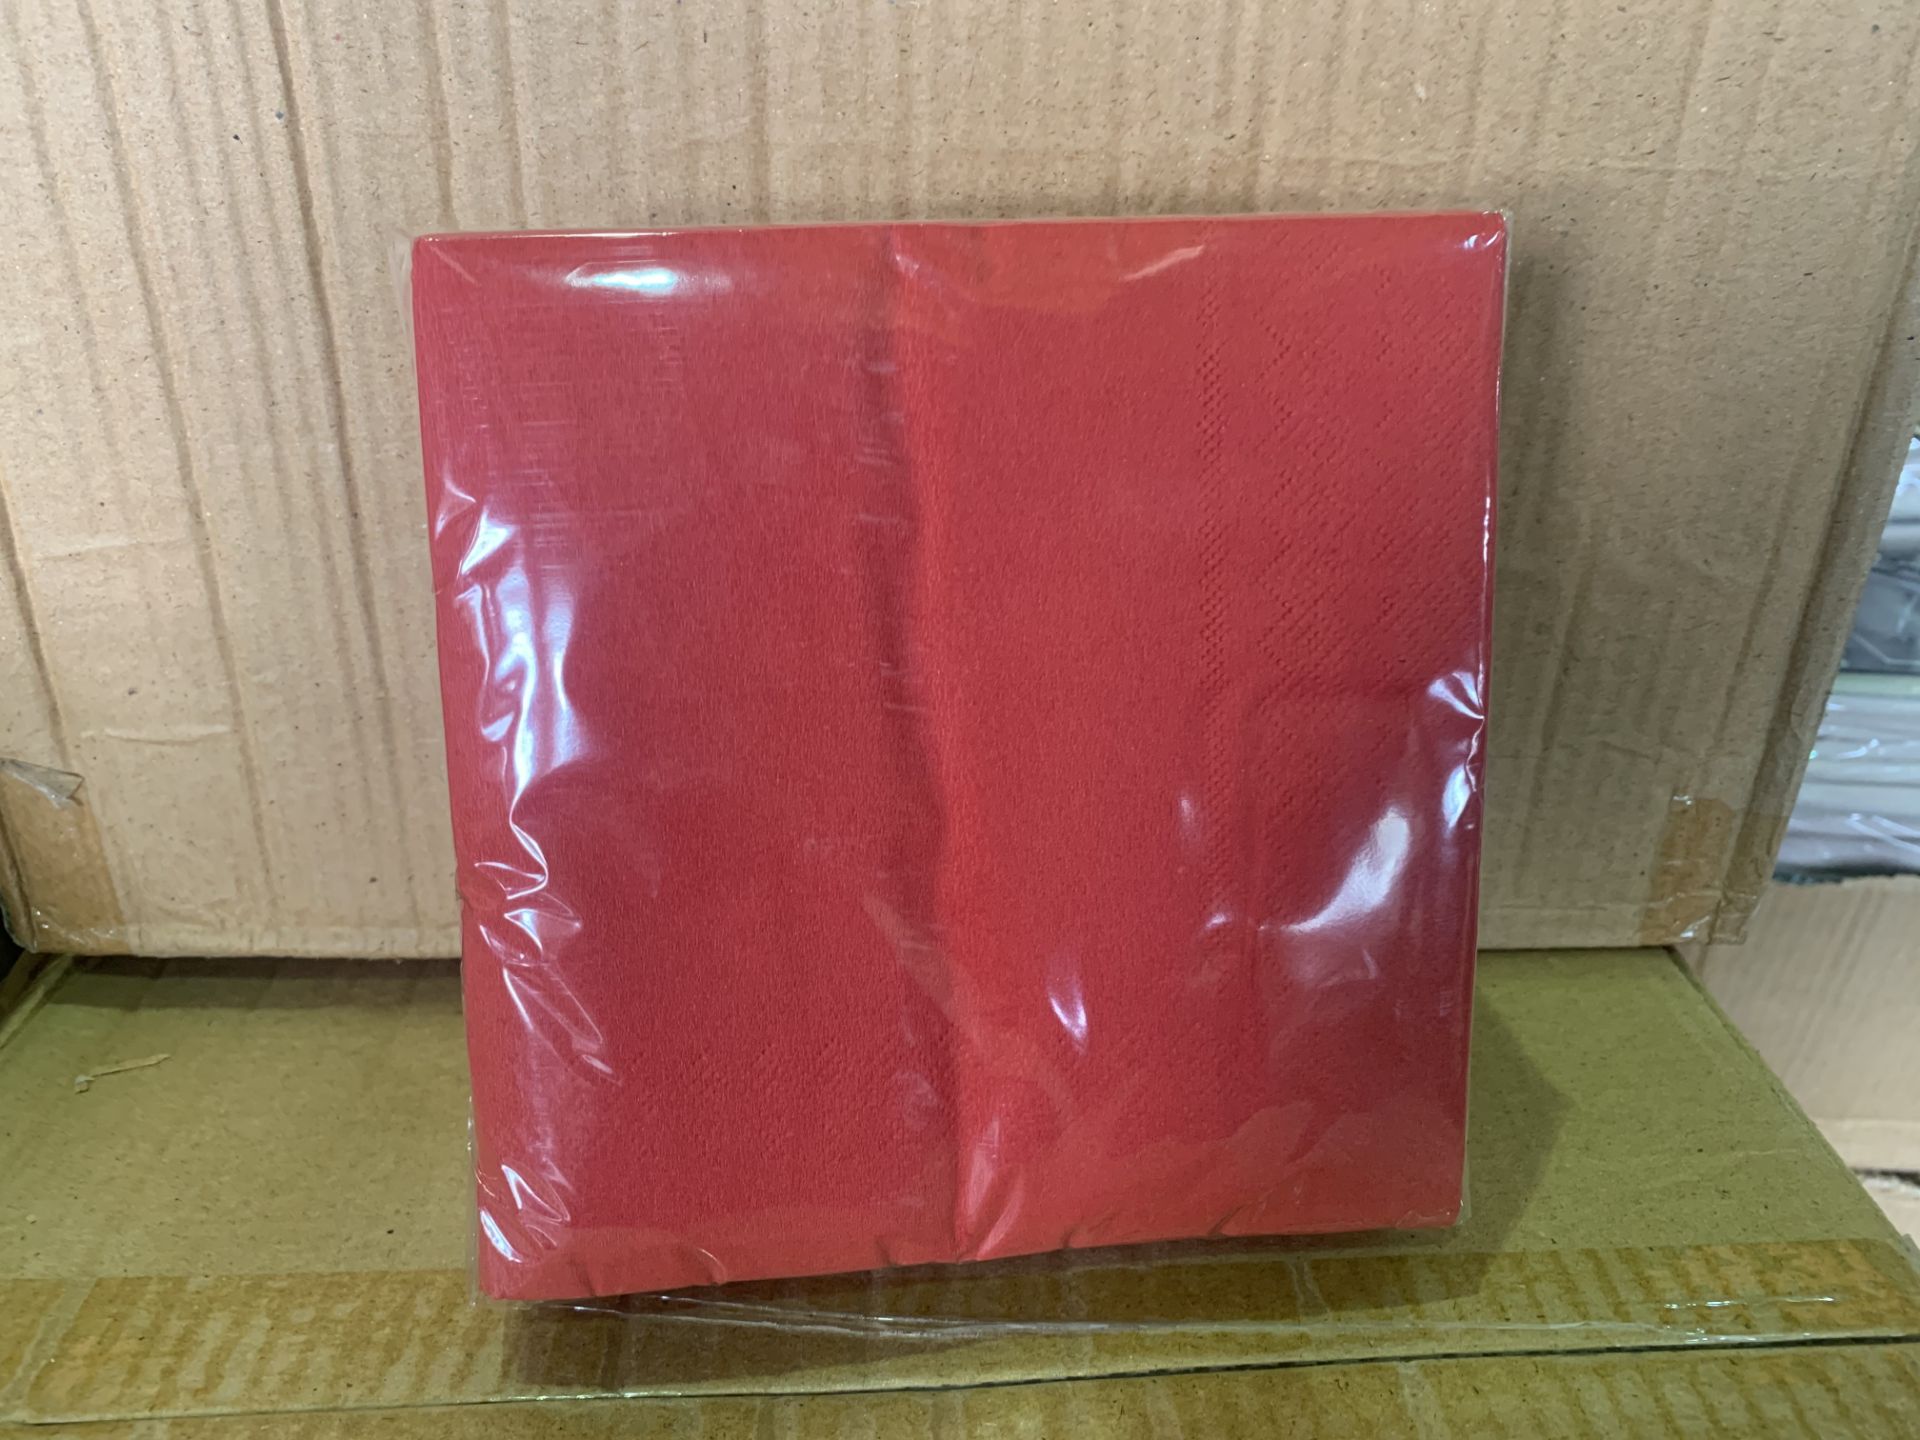 40 X BRAND NEW PACKS OF 50 RED 33CM NAPKINS 3PLY